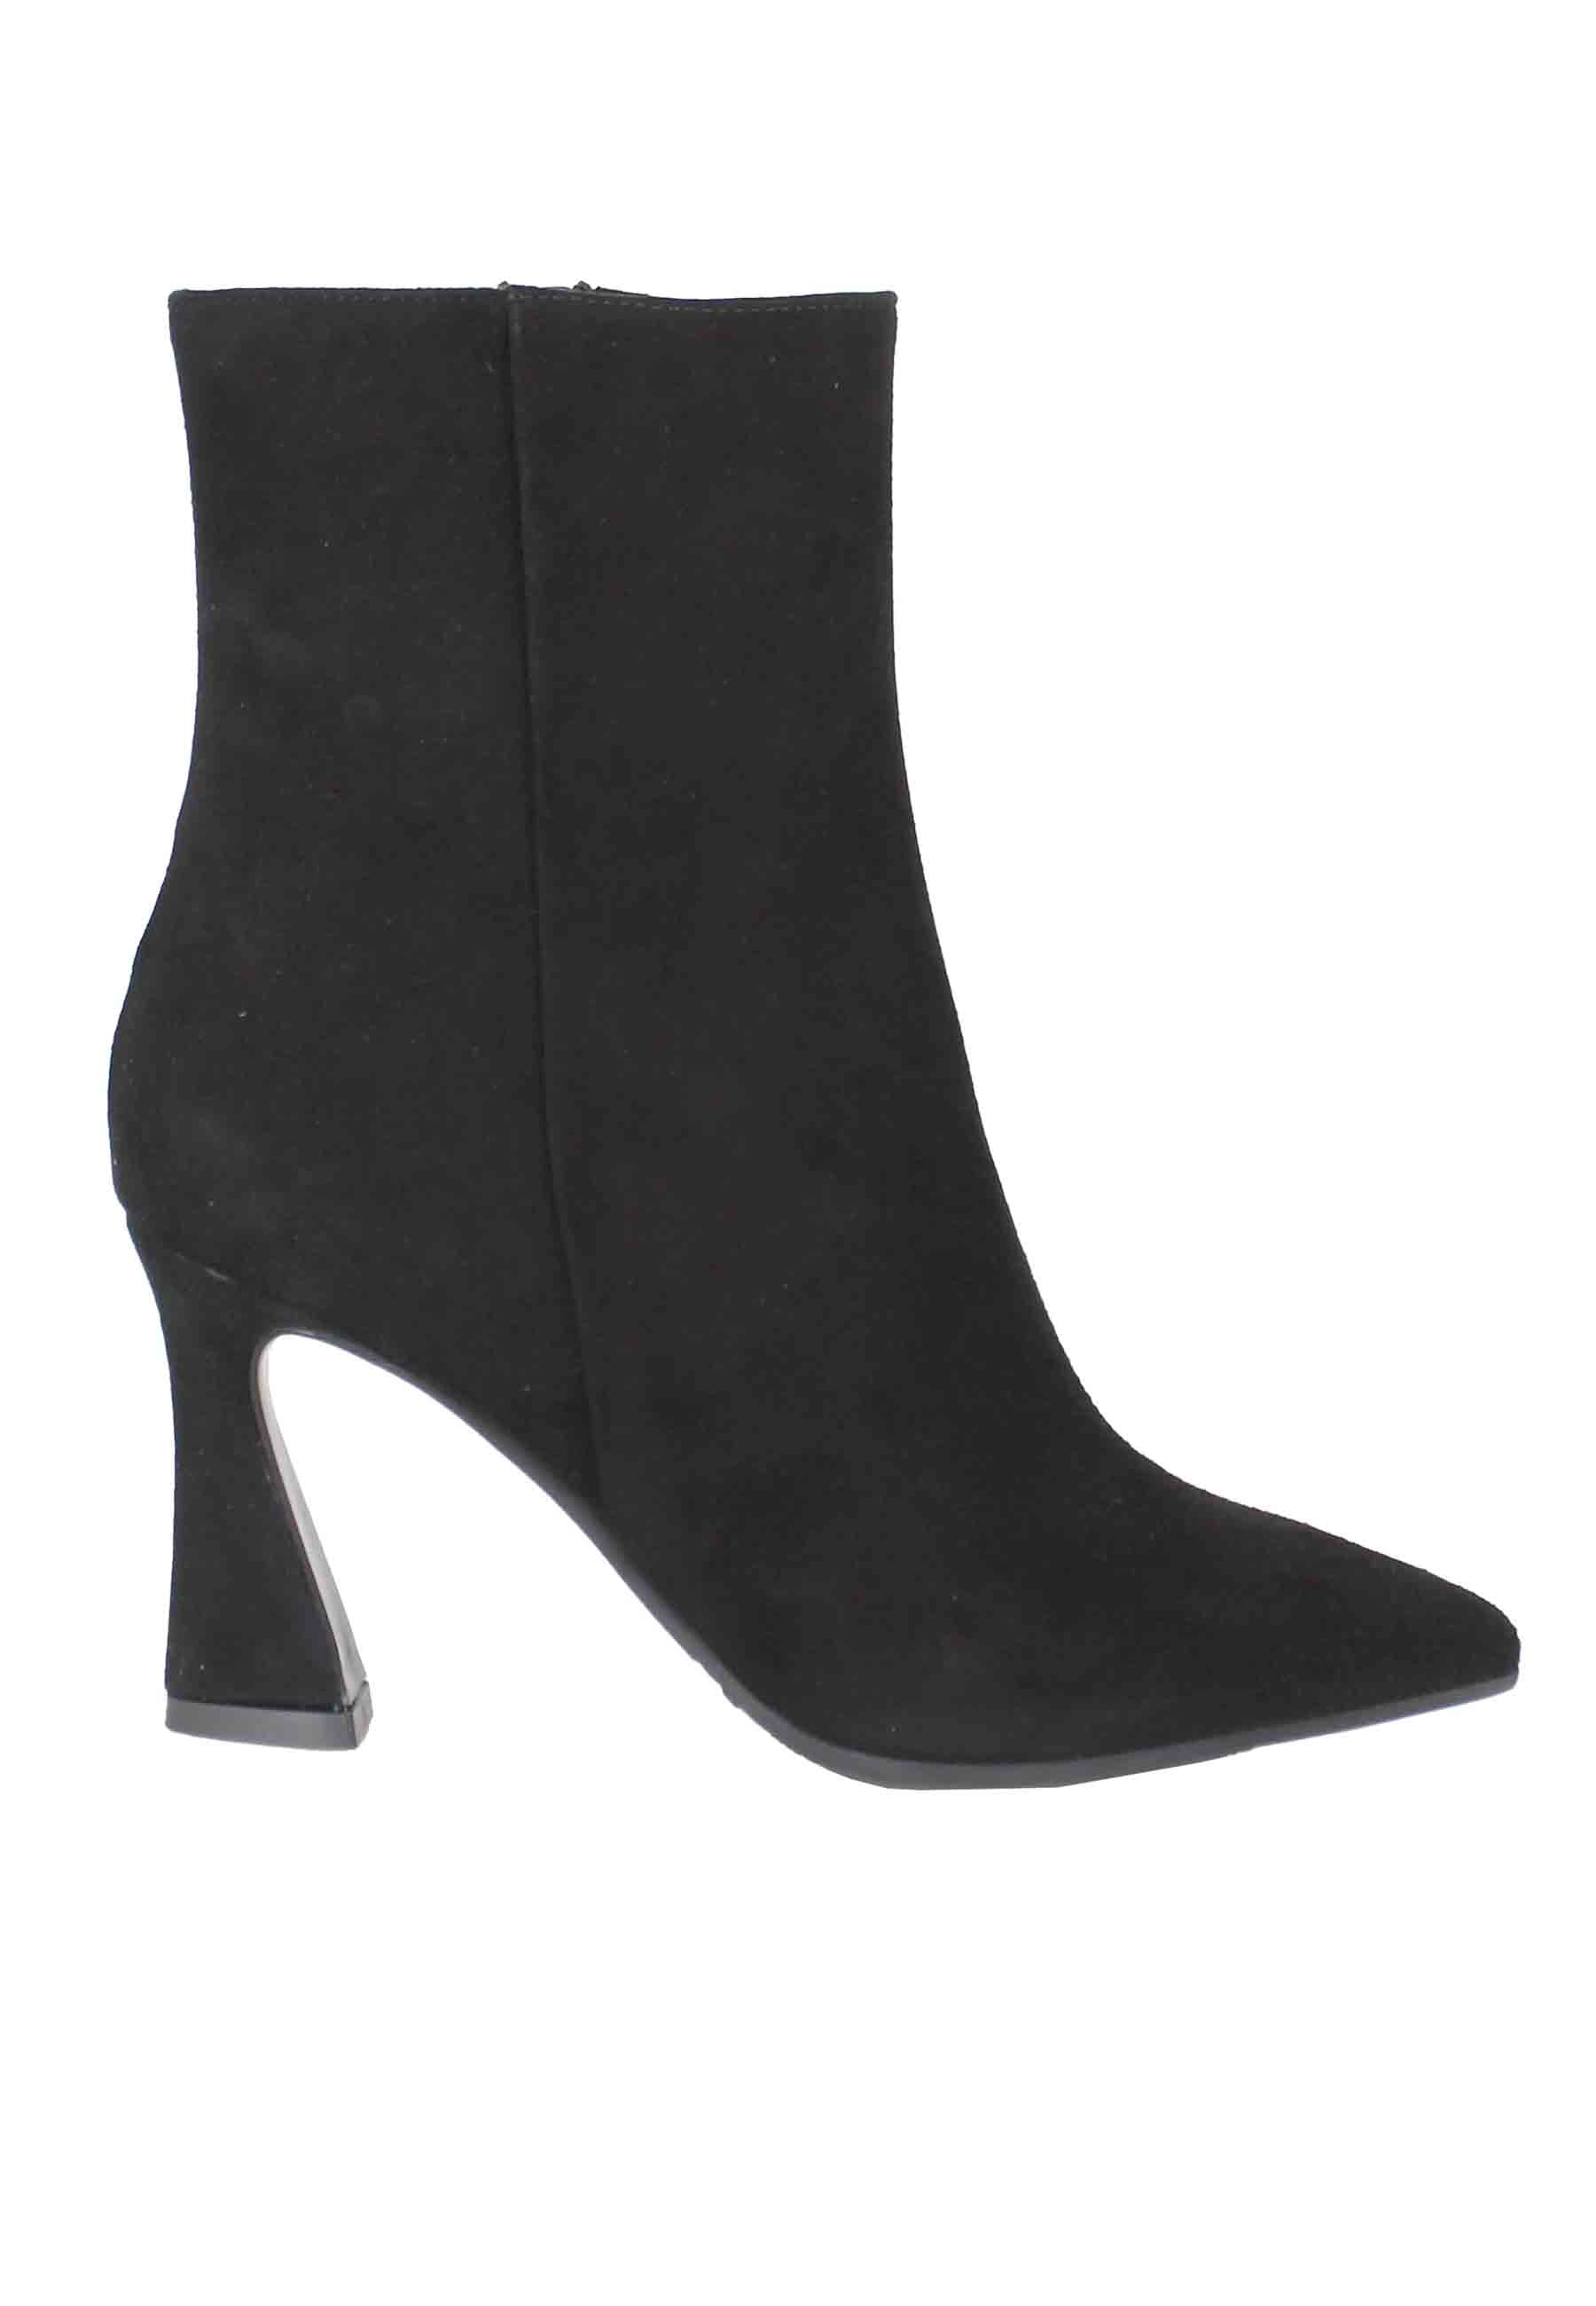 Women's black suede high heel pointed toe ankle boots